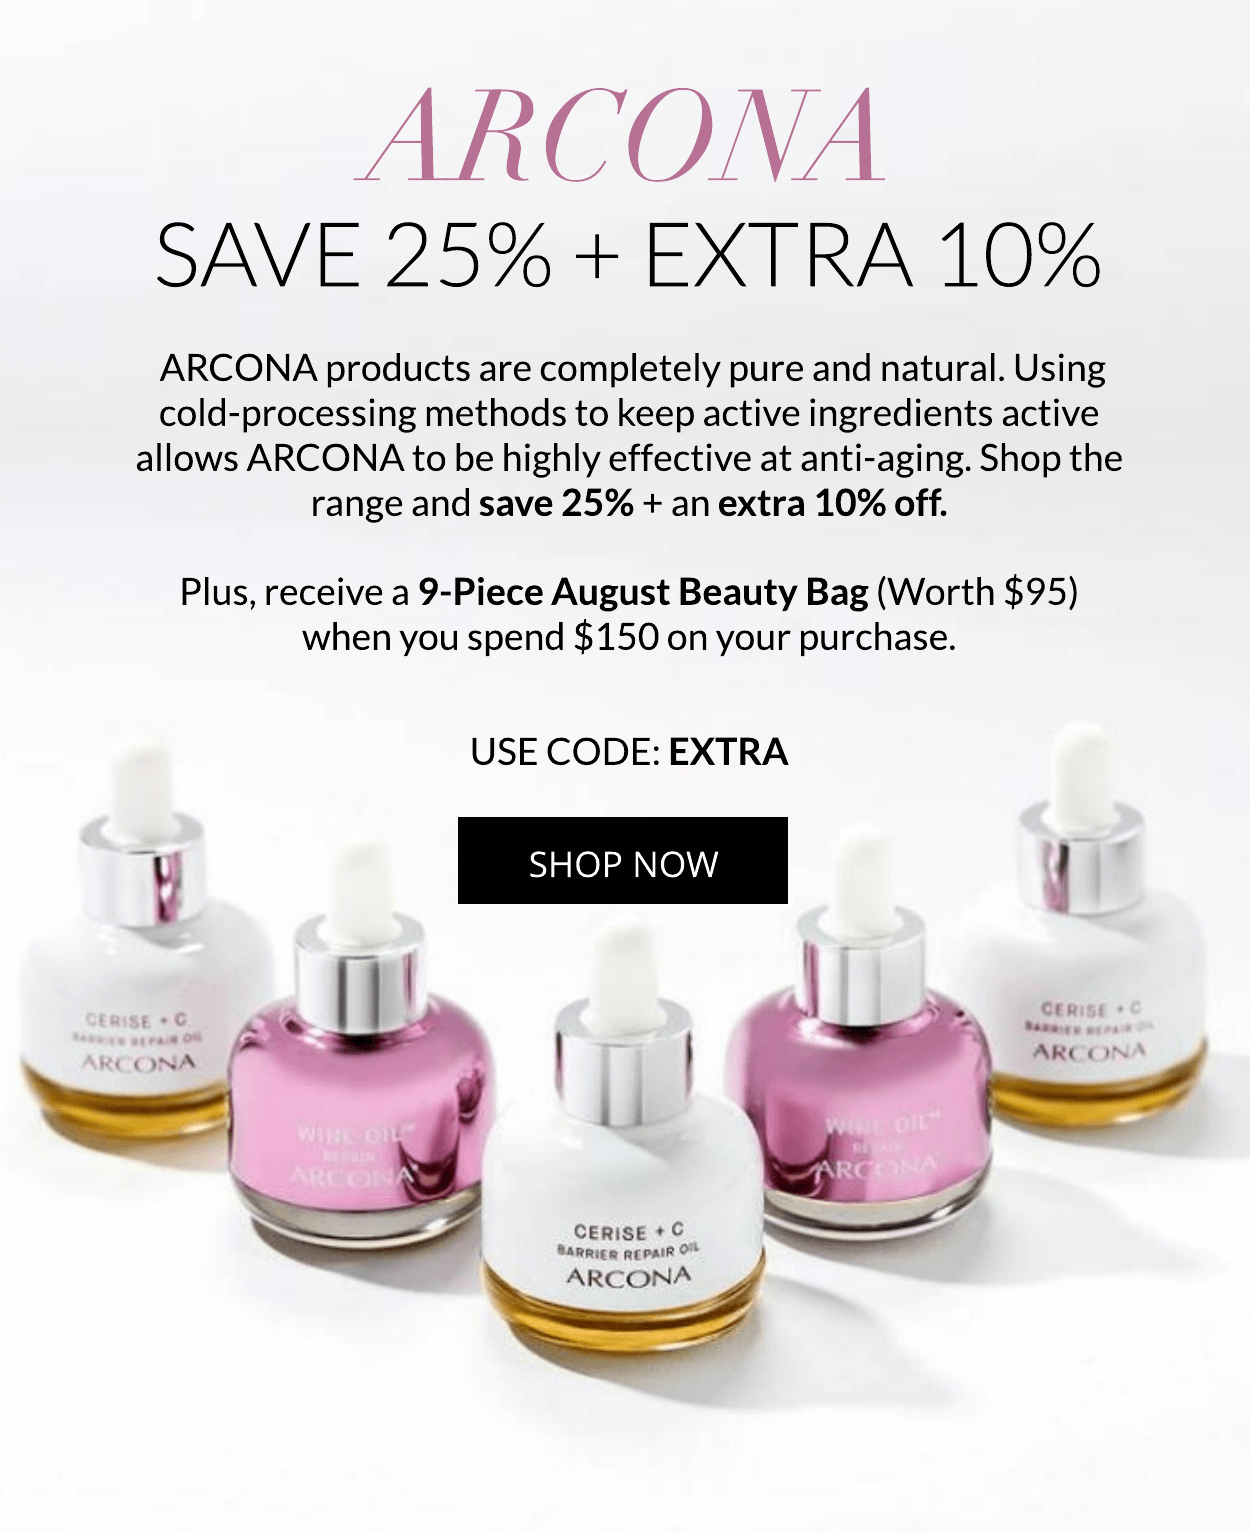 Save 25% on ARCONA + Extra 10% off